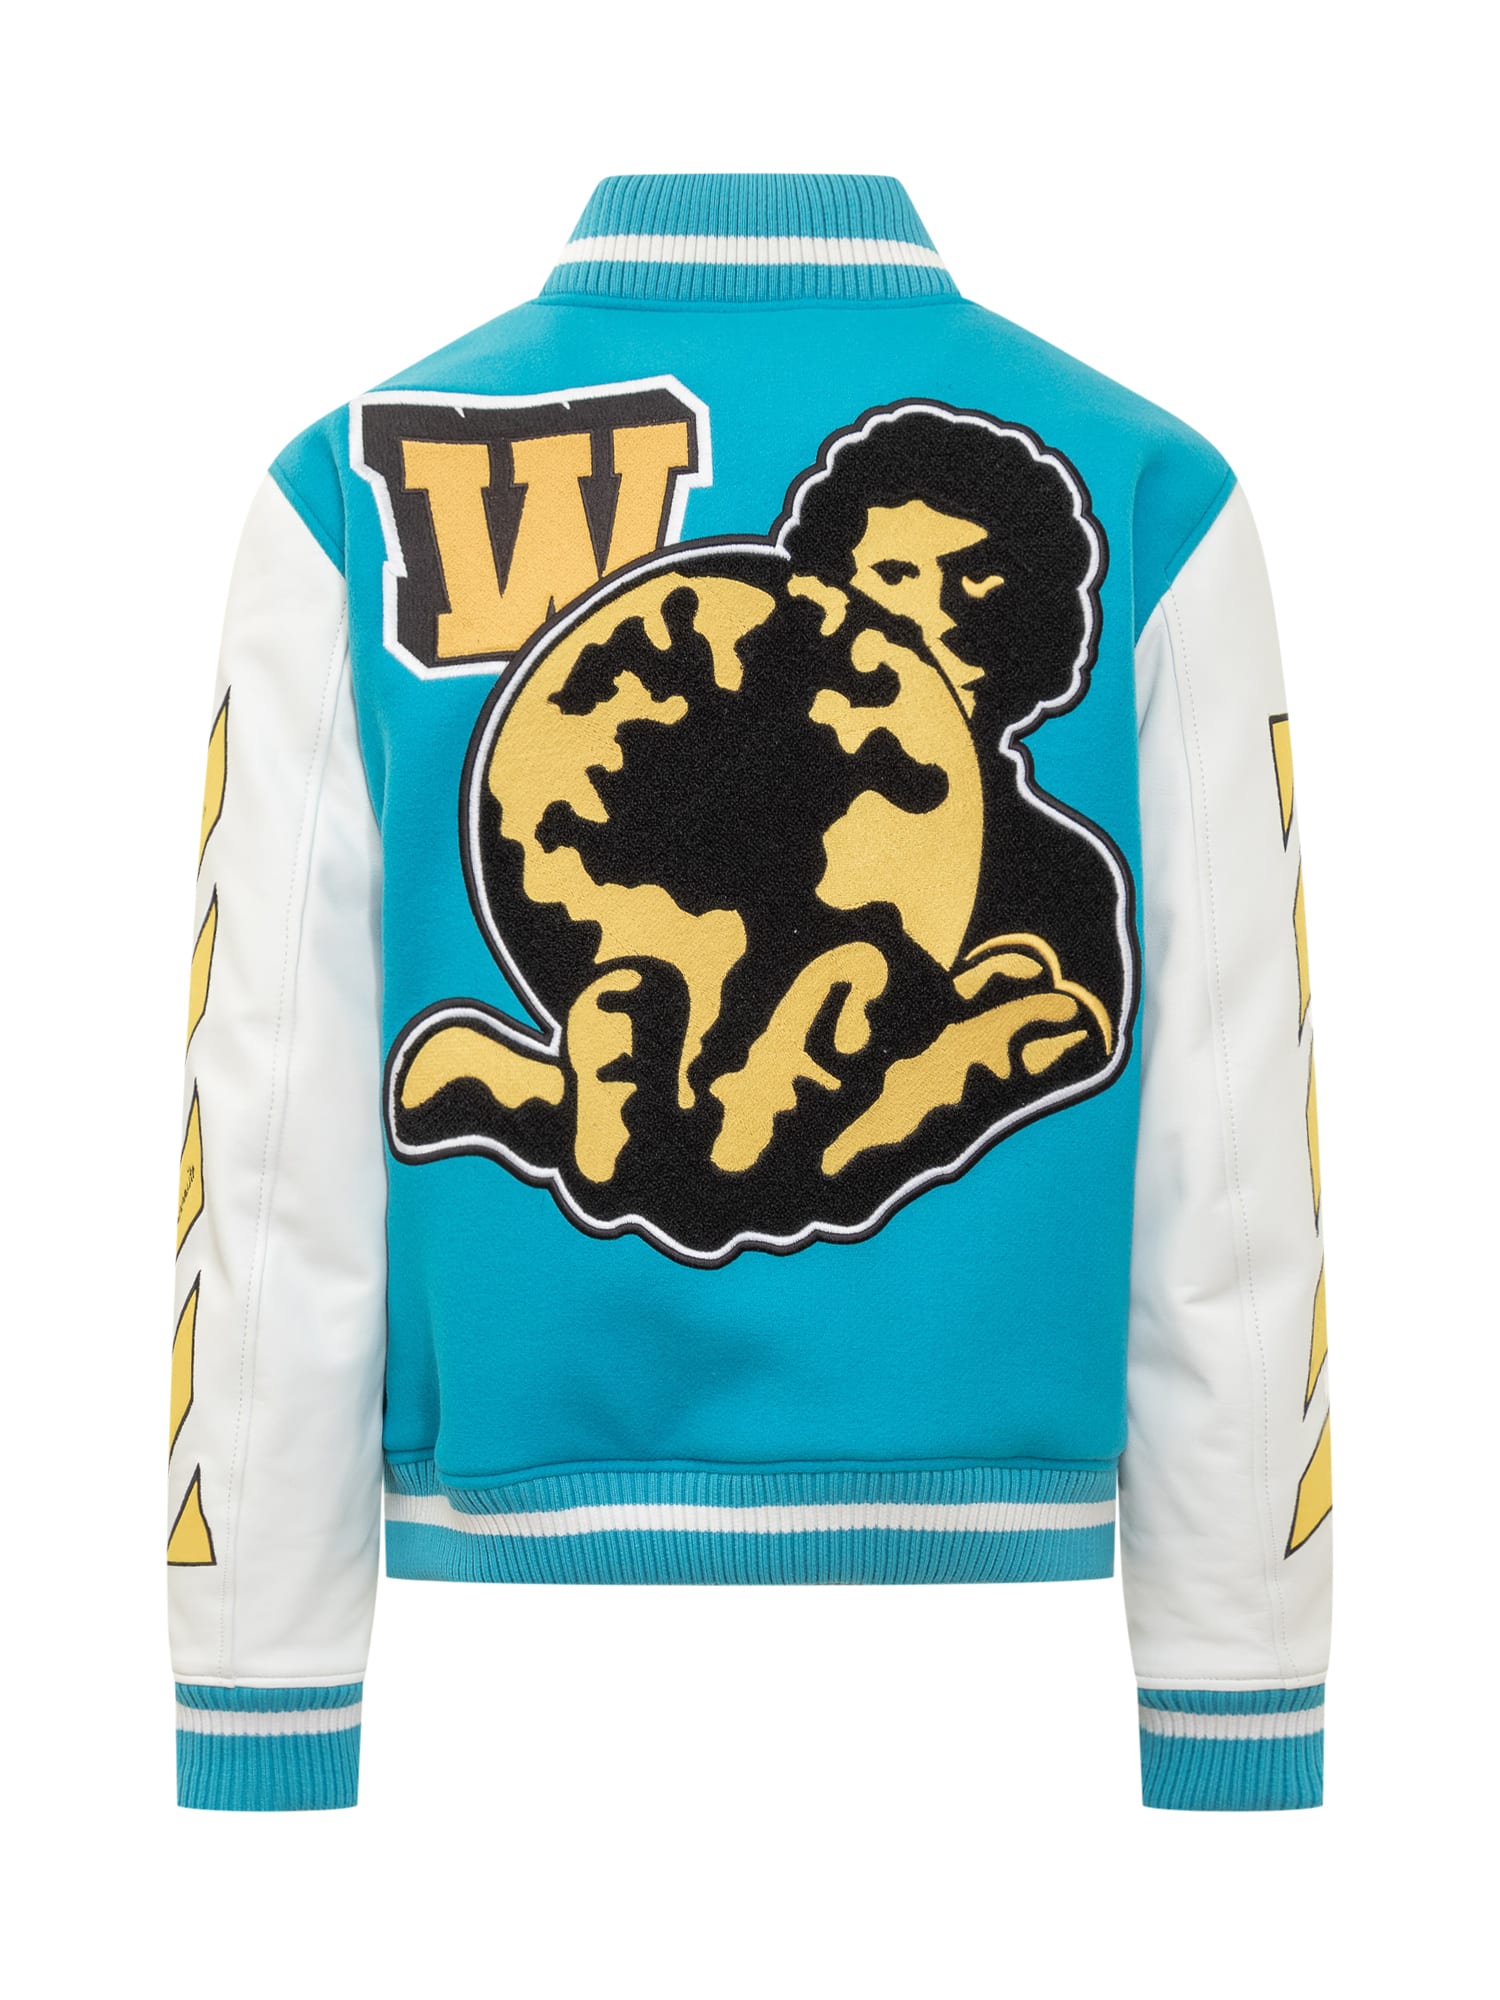 Vars World Leather Jackets in blue